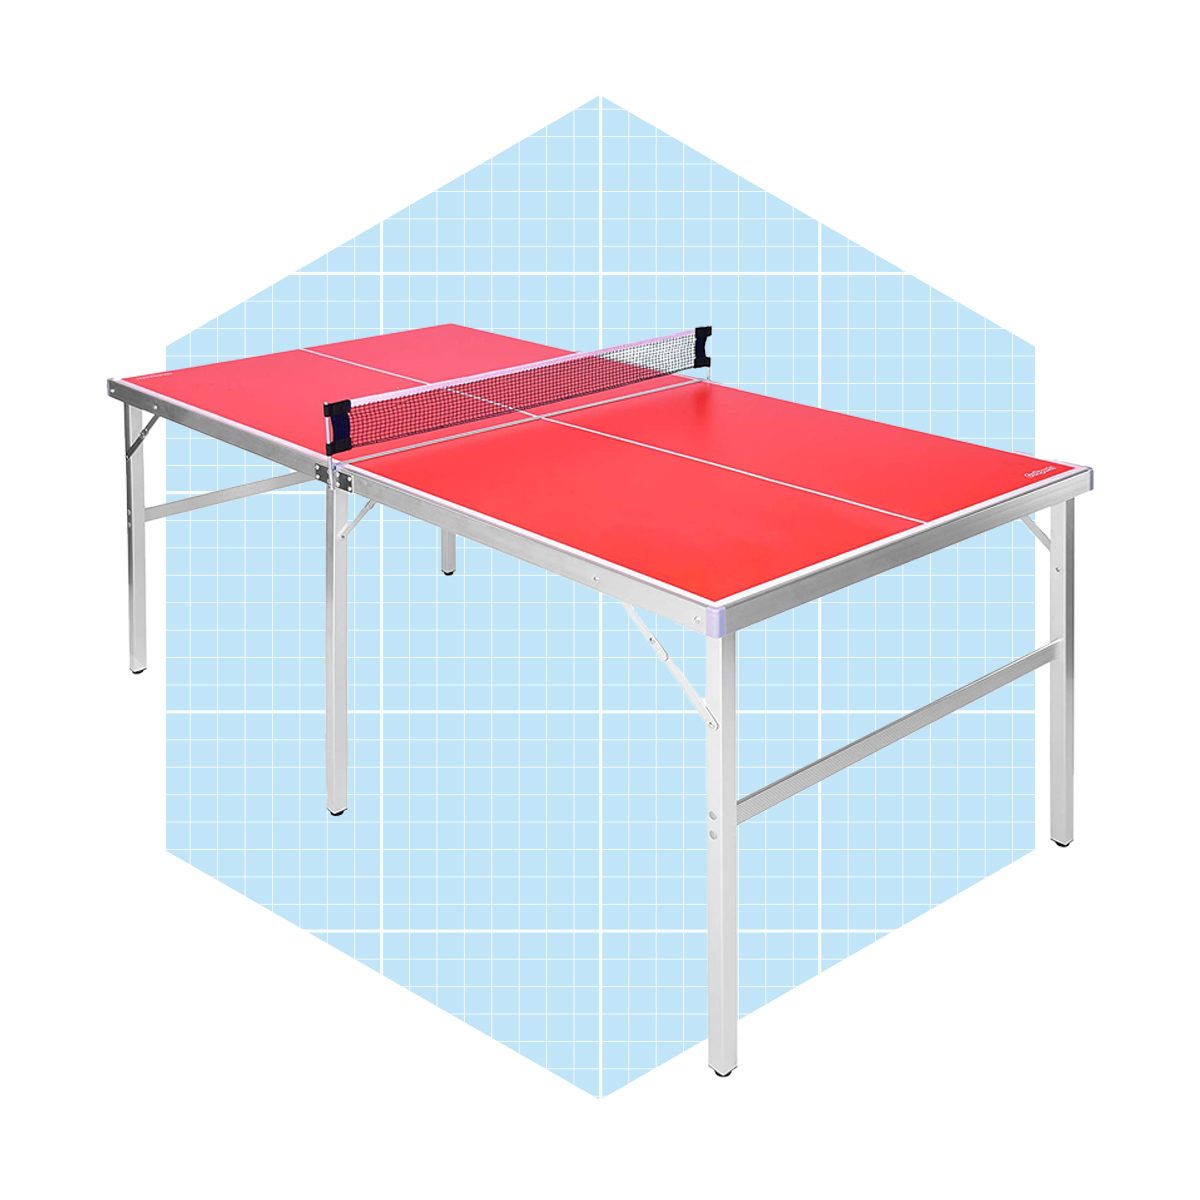 Portable Table Tennis Table Mid-Size for Indoor&Outdoor Table